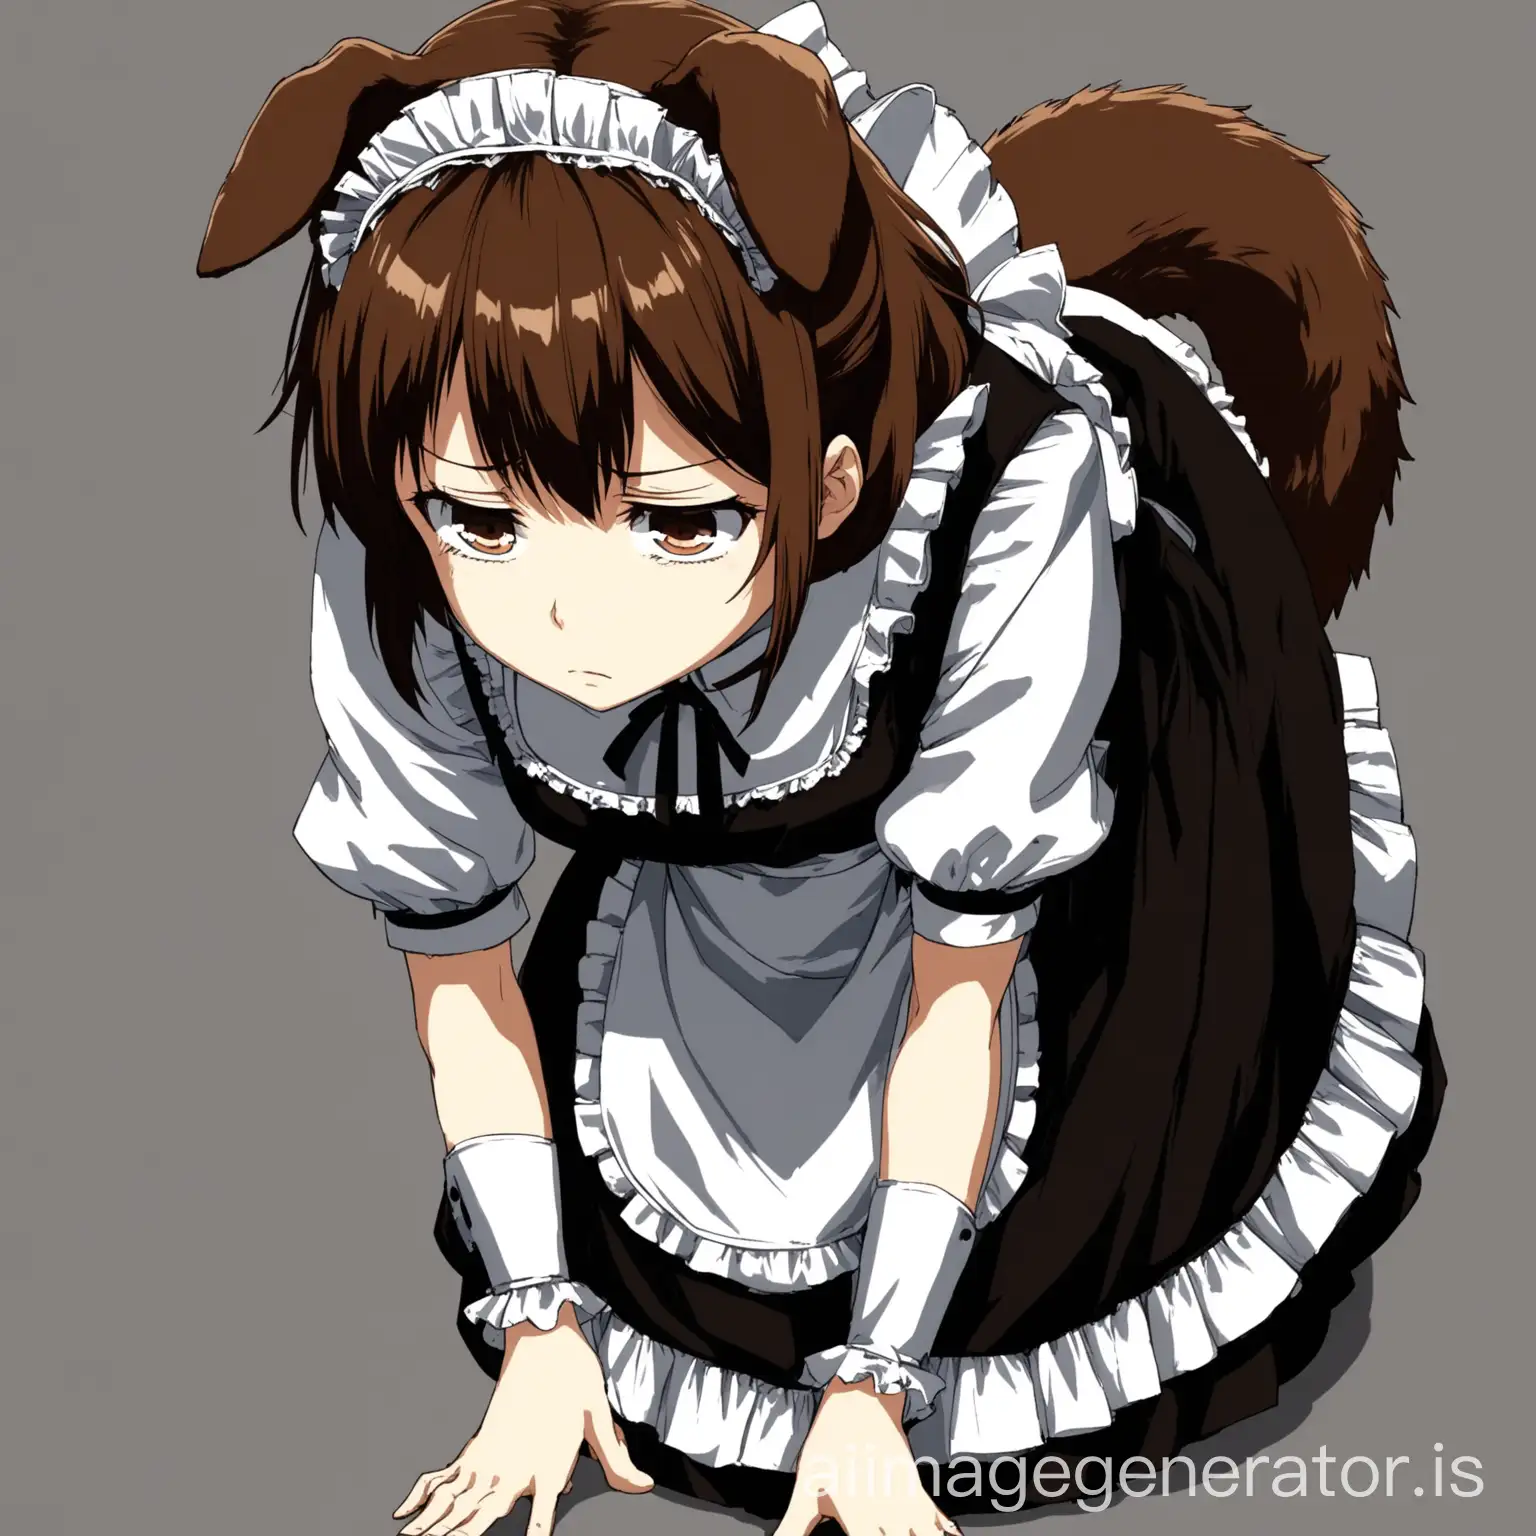 Anime girl bowing down looking up slightlt with her head. Dog ears and tail. Maid dress. Emberssed expression on her face. Bowing down like a servent. DOG EARS. Brown hair